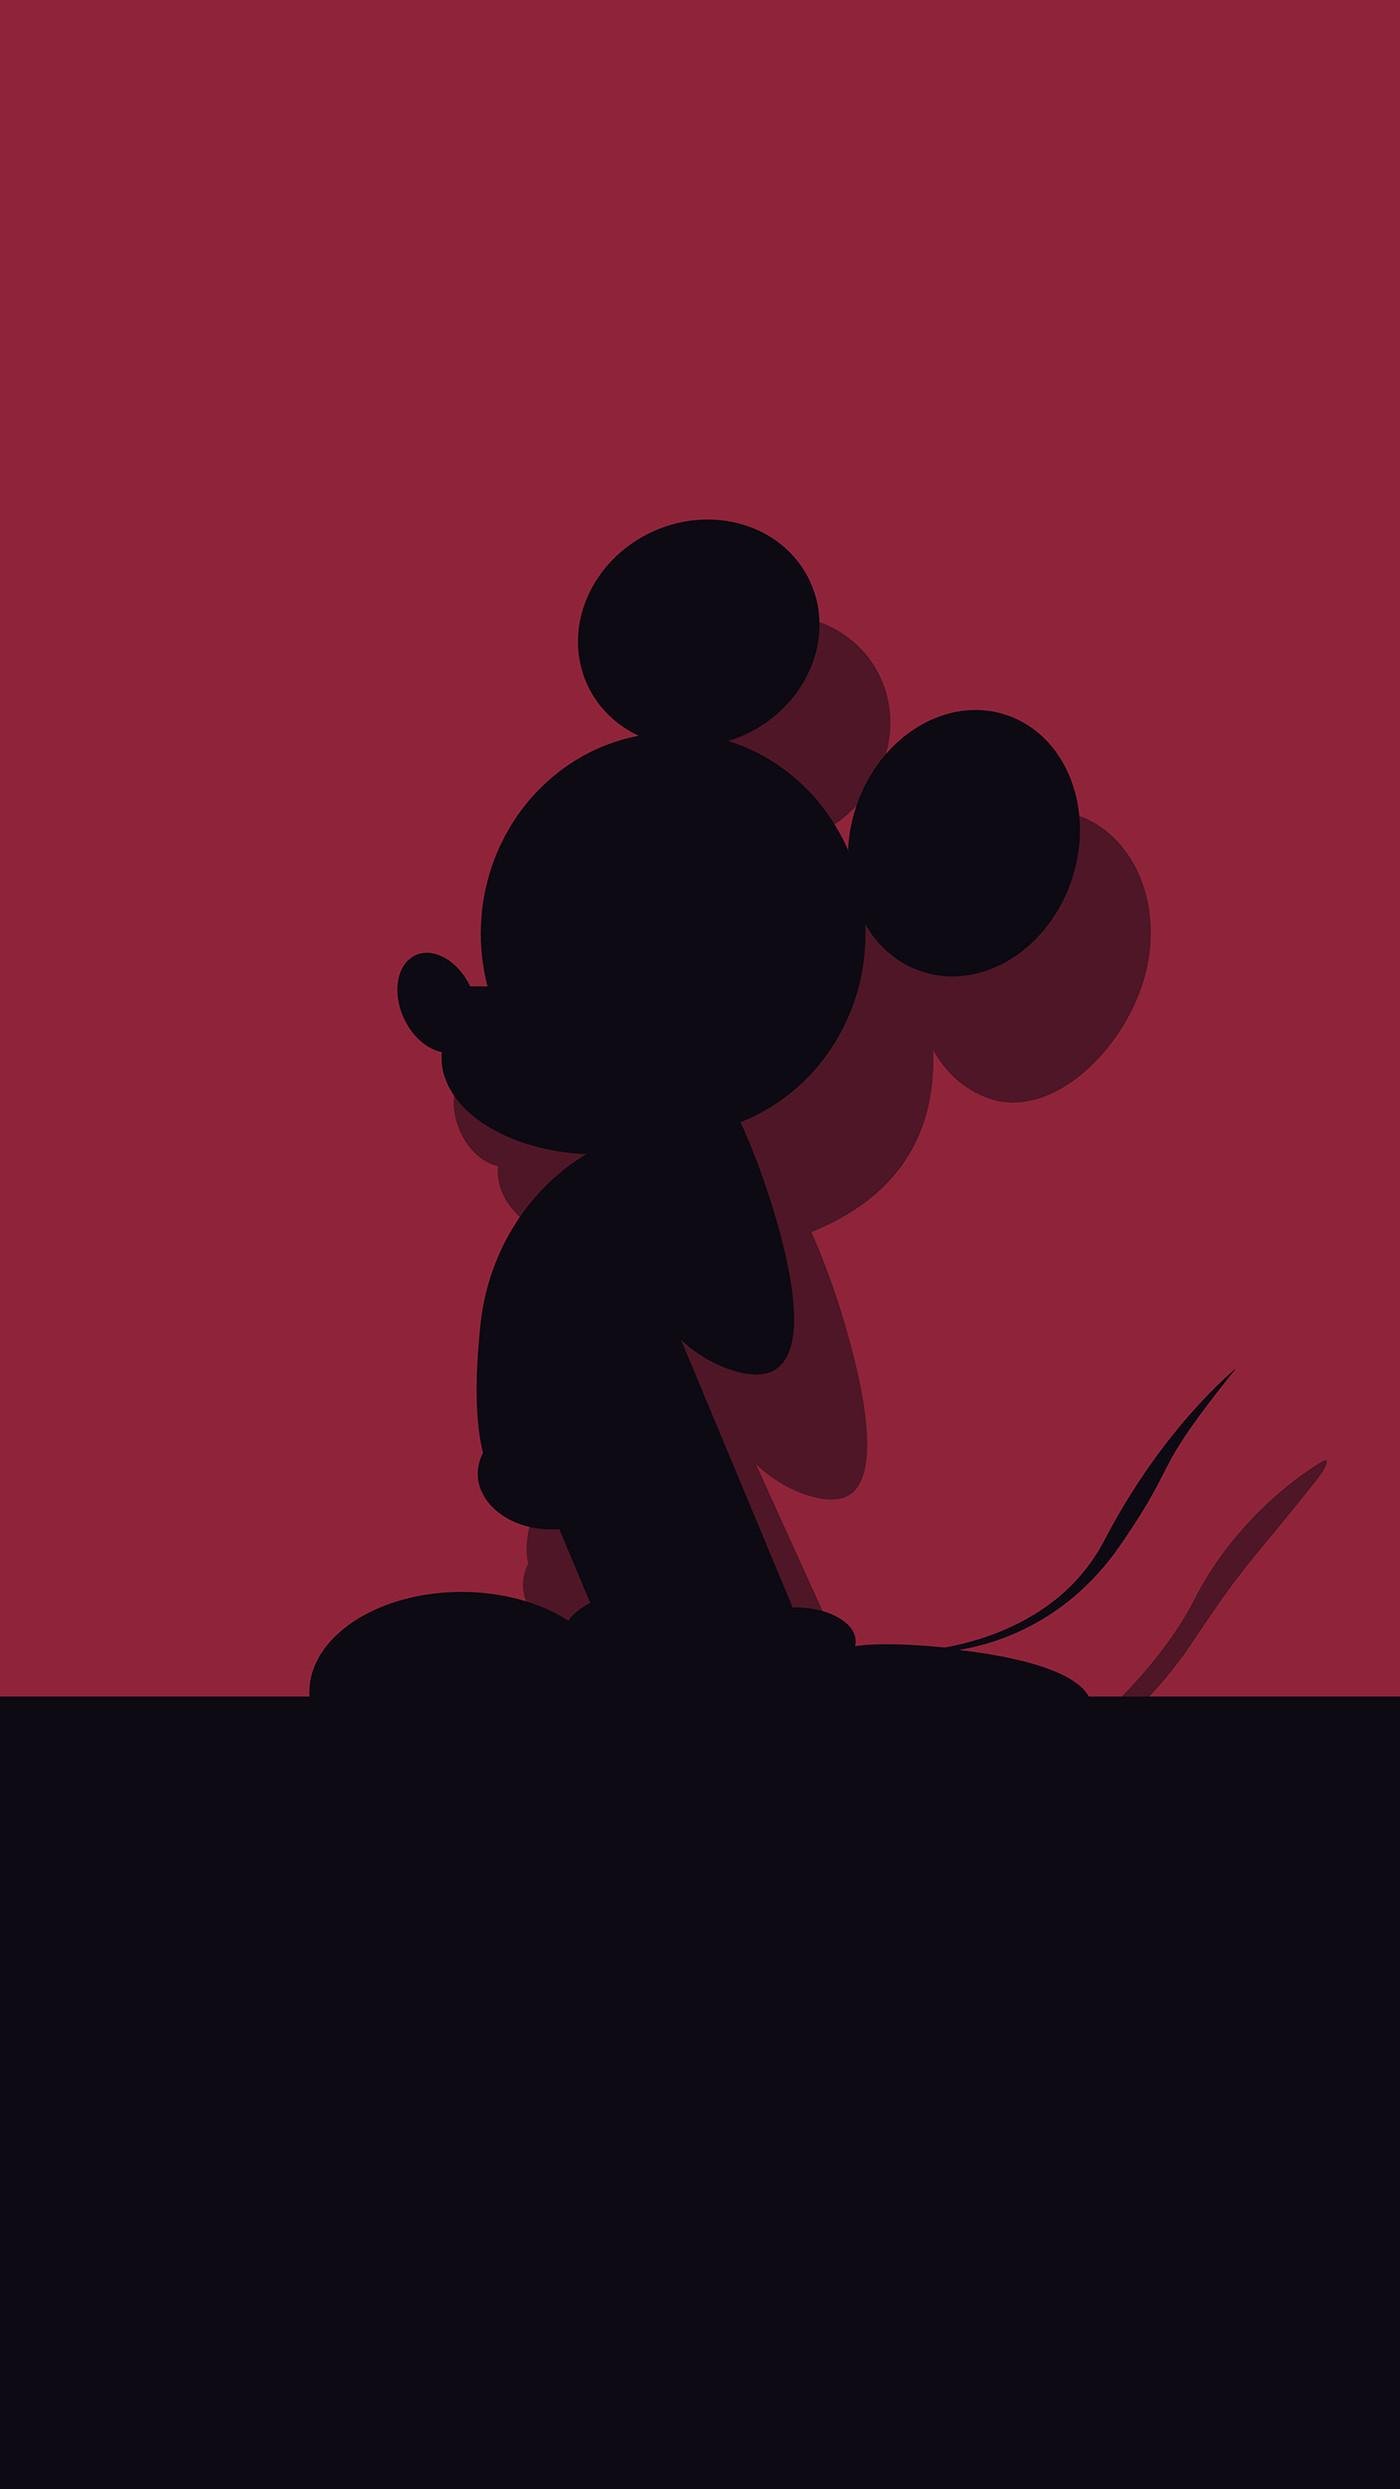 Minnie Mouse Wallpaper  NawPic